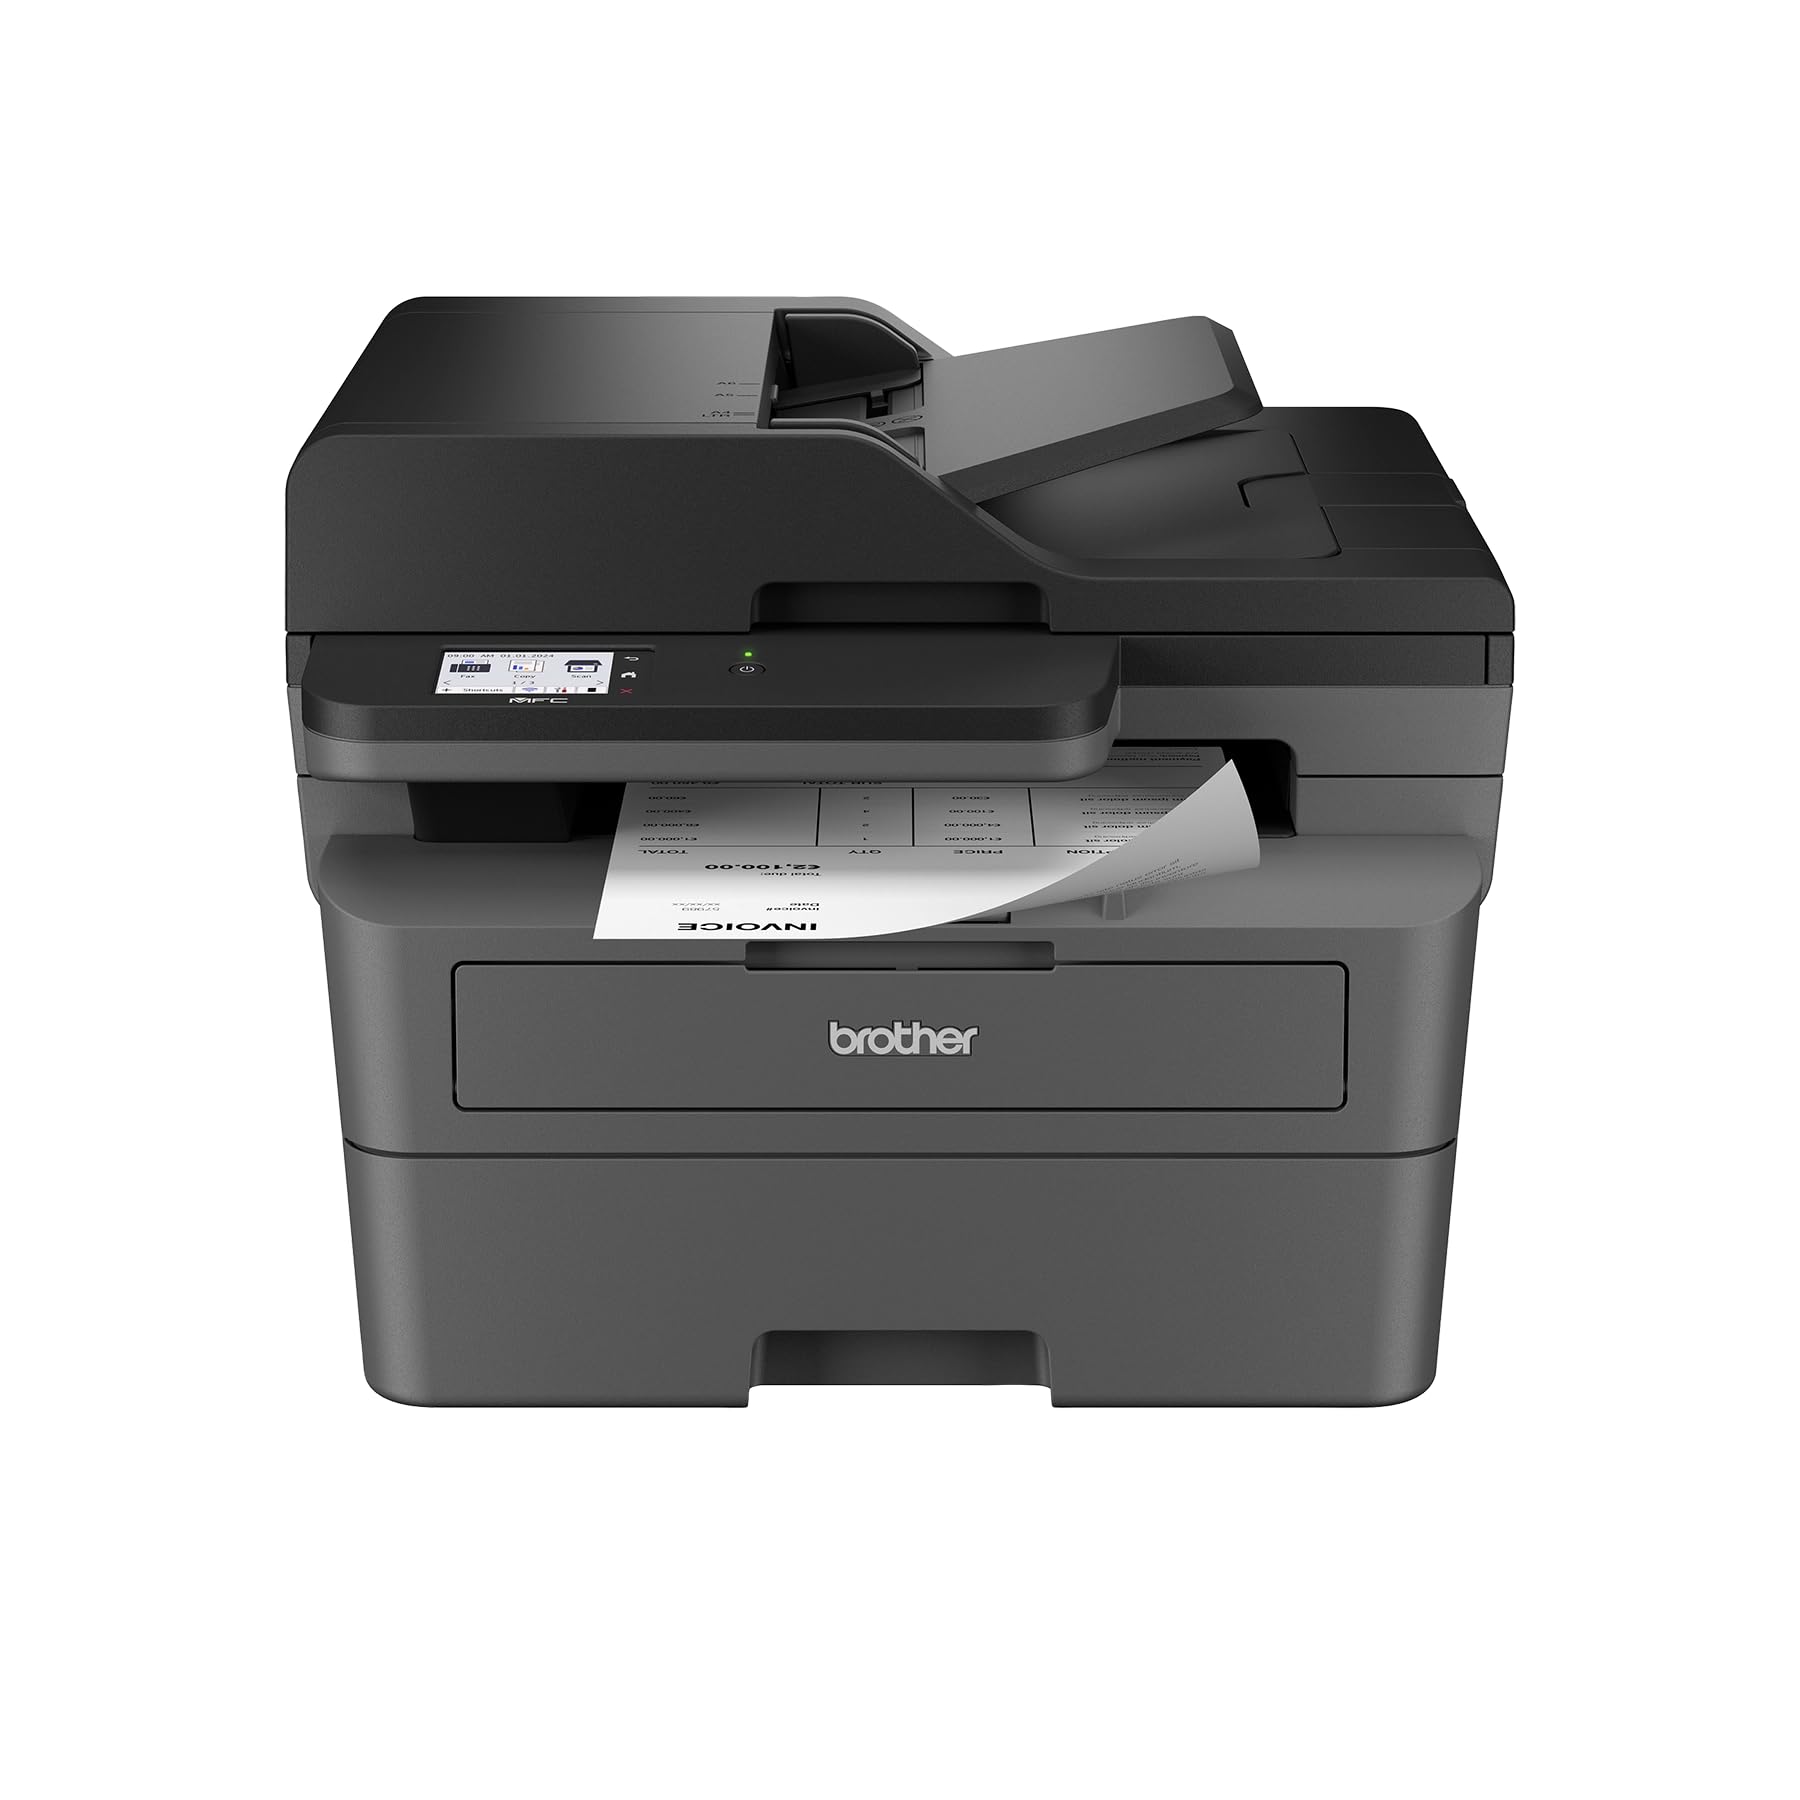 Brother MFC-L2820DW Wireless Compact Monochrome All-in-One Laser Printer with Copy, Scan and Fax, Duplex, Black & White | Includes Refresh Subscription Trial(1), Amazon Dash Replenishment Ready